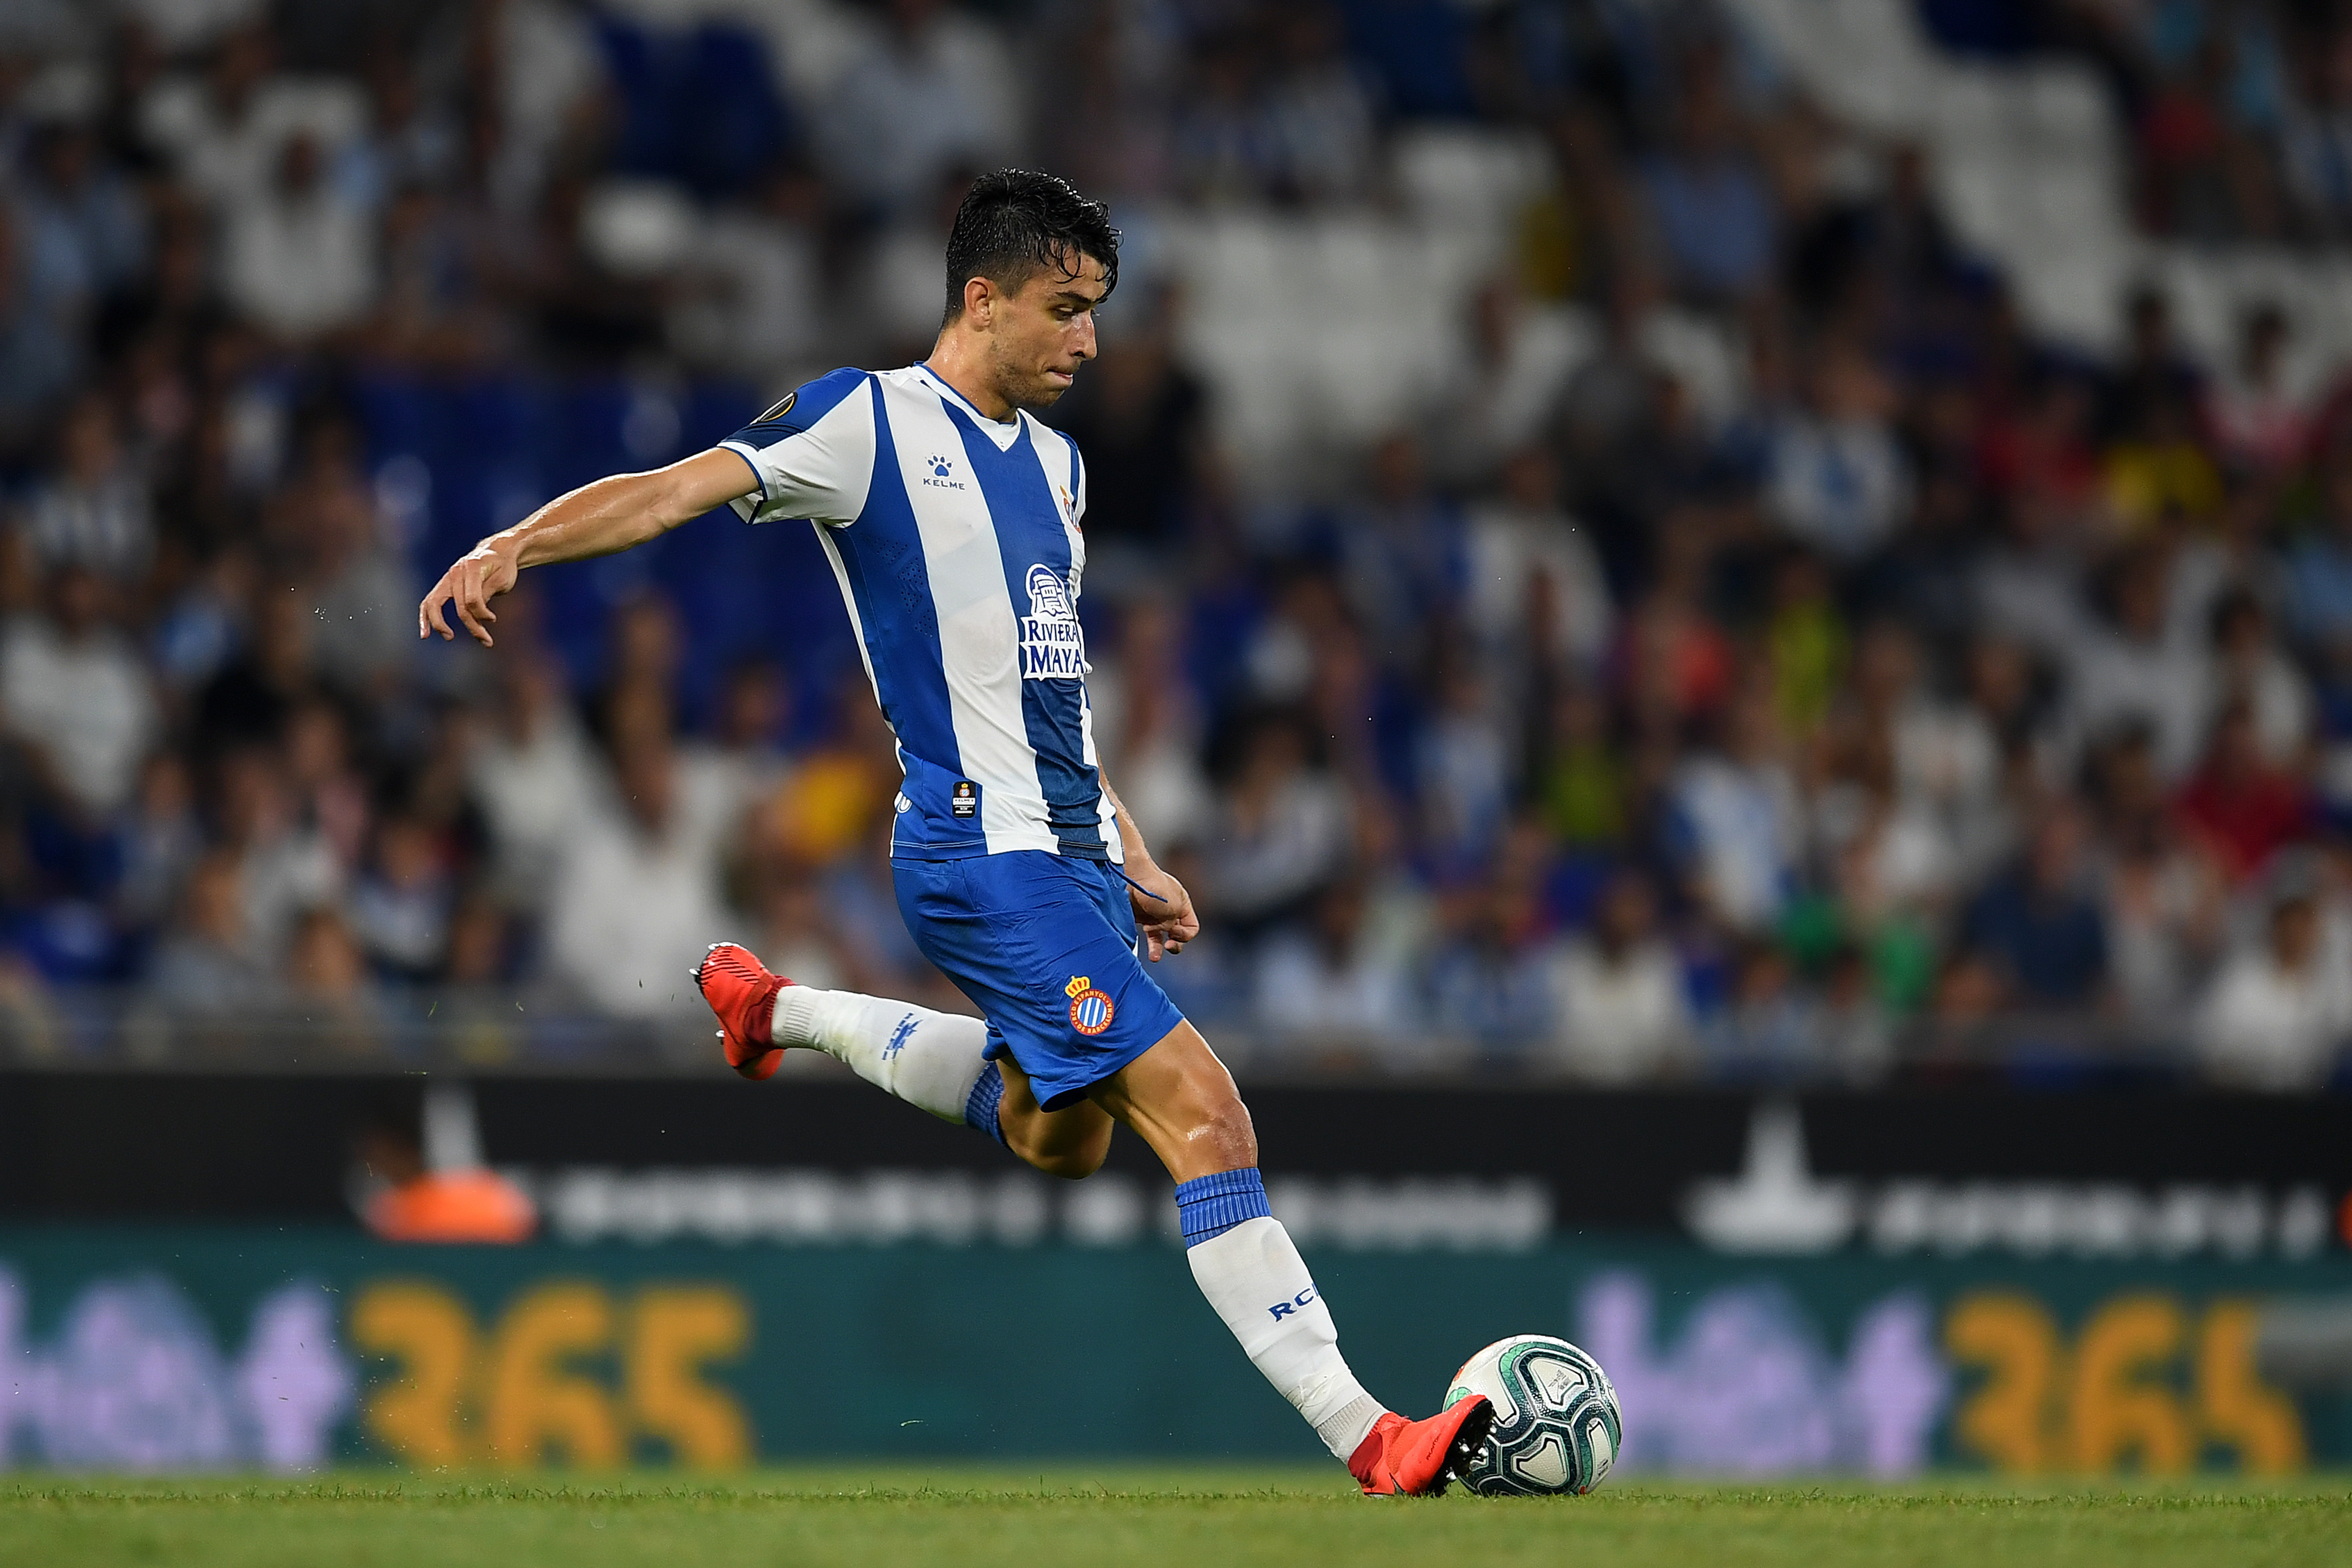 BARCELONA, SPAIN - JULY 25: Marc Roca of RCD Espanyol runs with the ball during the UEFA Europa League Second Qualifying round 1st leg match between RCD Espanyol and Stjarnan at Cornella-El Prat Stadium on July 25, 2019 in Barcelona, Spain. (Photo by David Ramos/Getty Images)